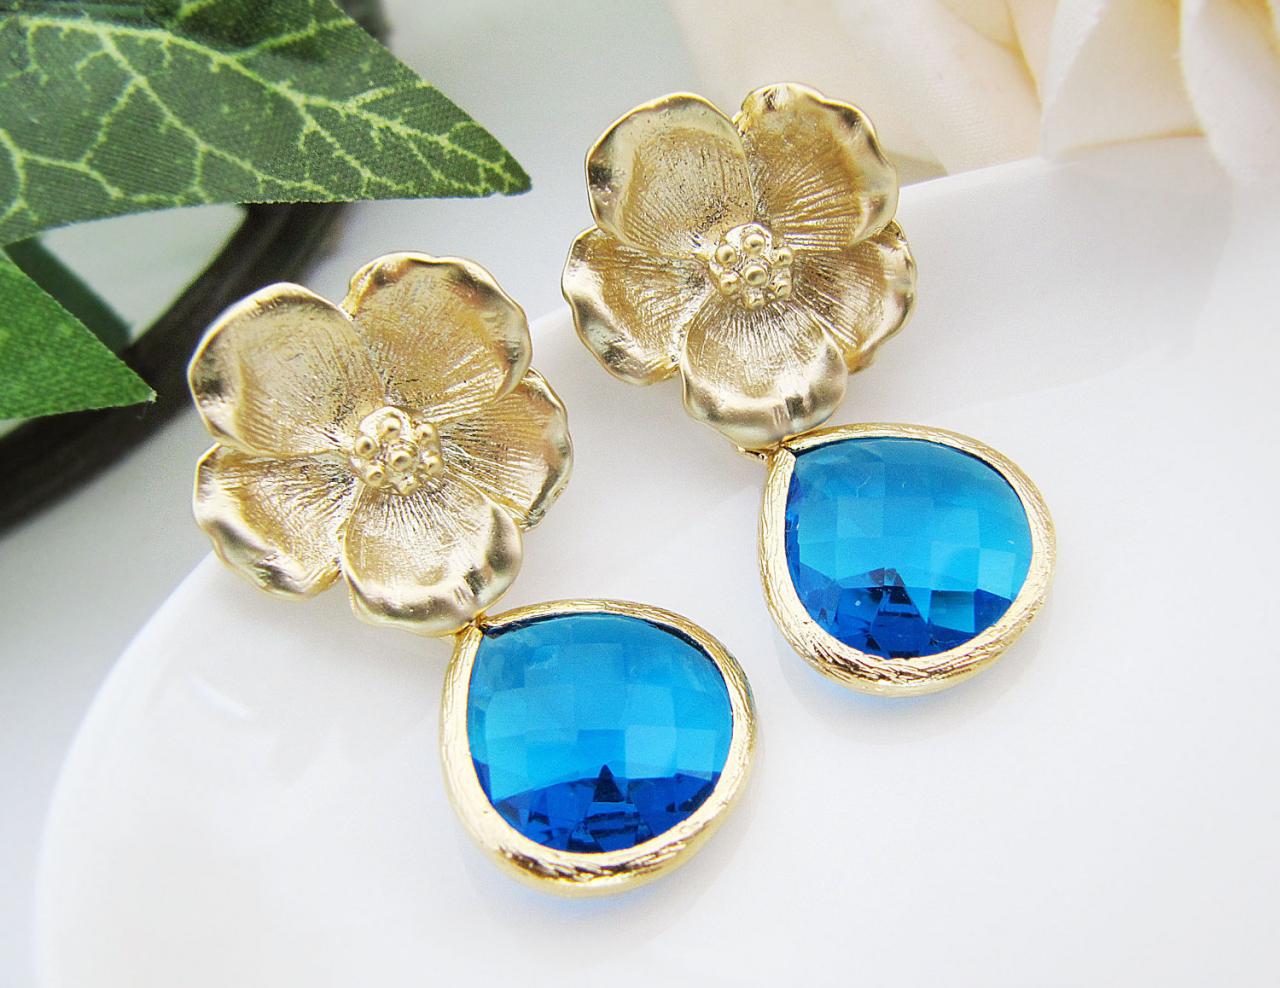 Matte Gold Flower Ear Posts And Capri Blue Glass Drop Earrings . For Her. Gift For Her. Bridesmaid Earrings